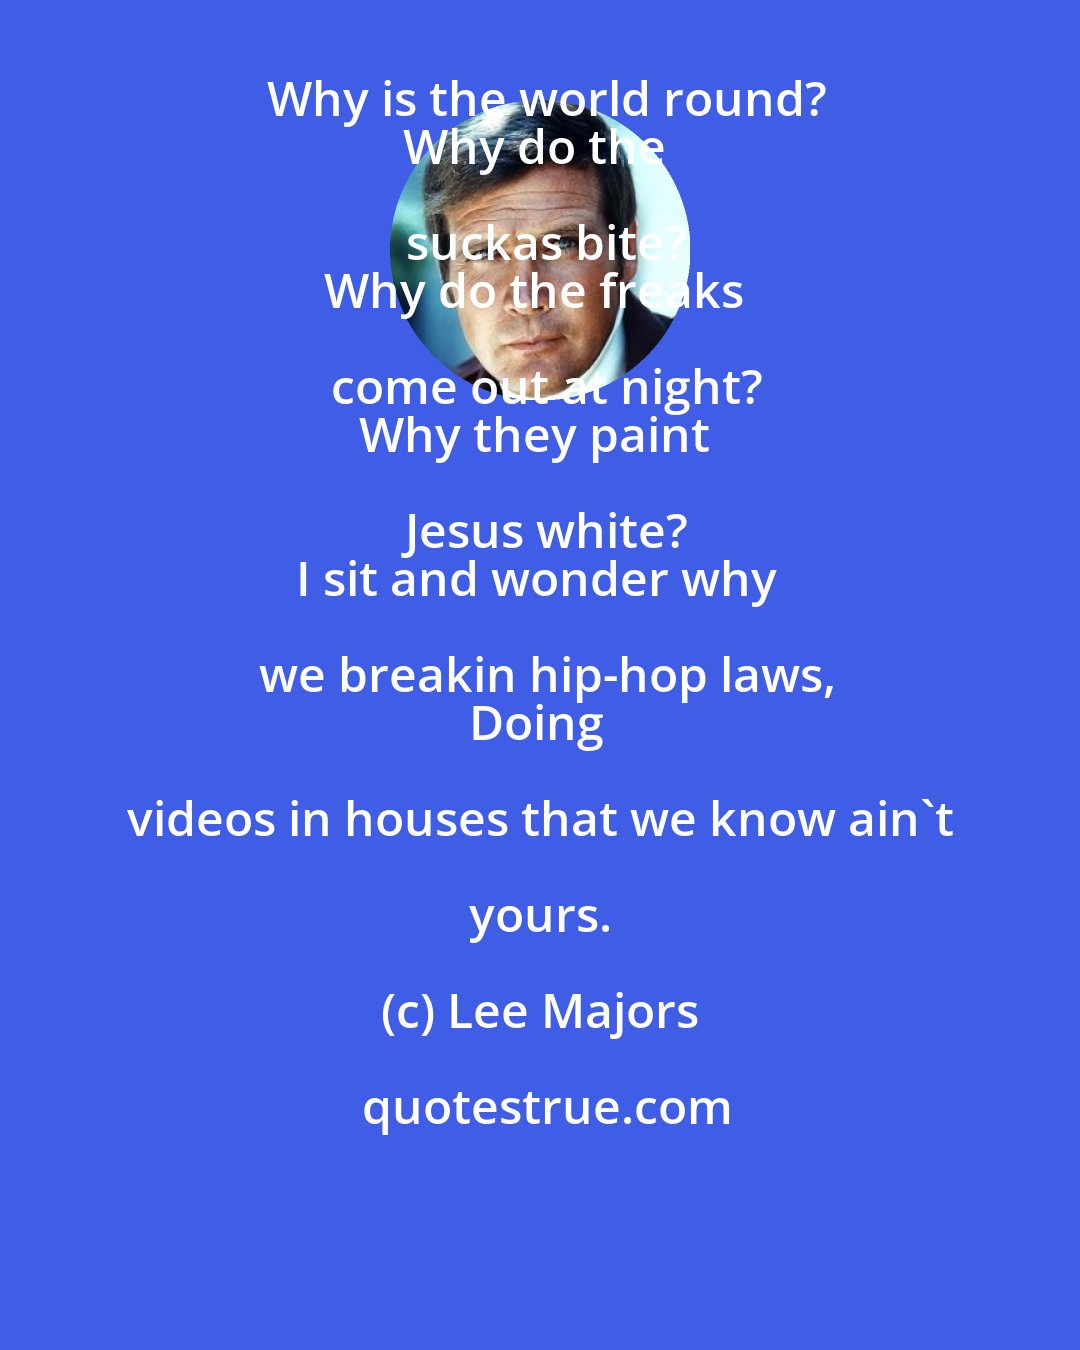 Lee Majors: Why is the world round?
Why do the suckas bite?
Why do the freaks come out at night?
Why they paint Jesus white?
I sit and wonder why we breakin hip-hop laws,
Doing videos in houses that we know ain't yours.